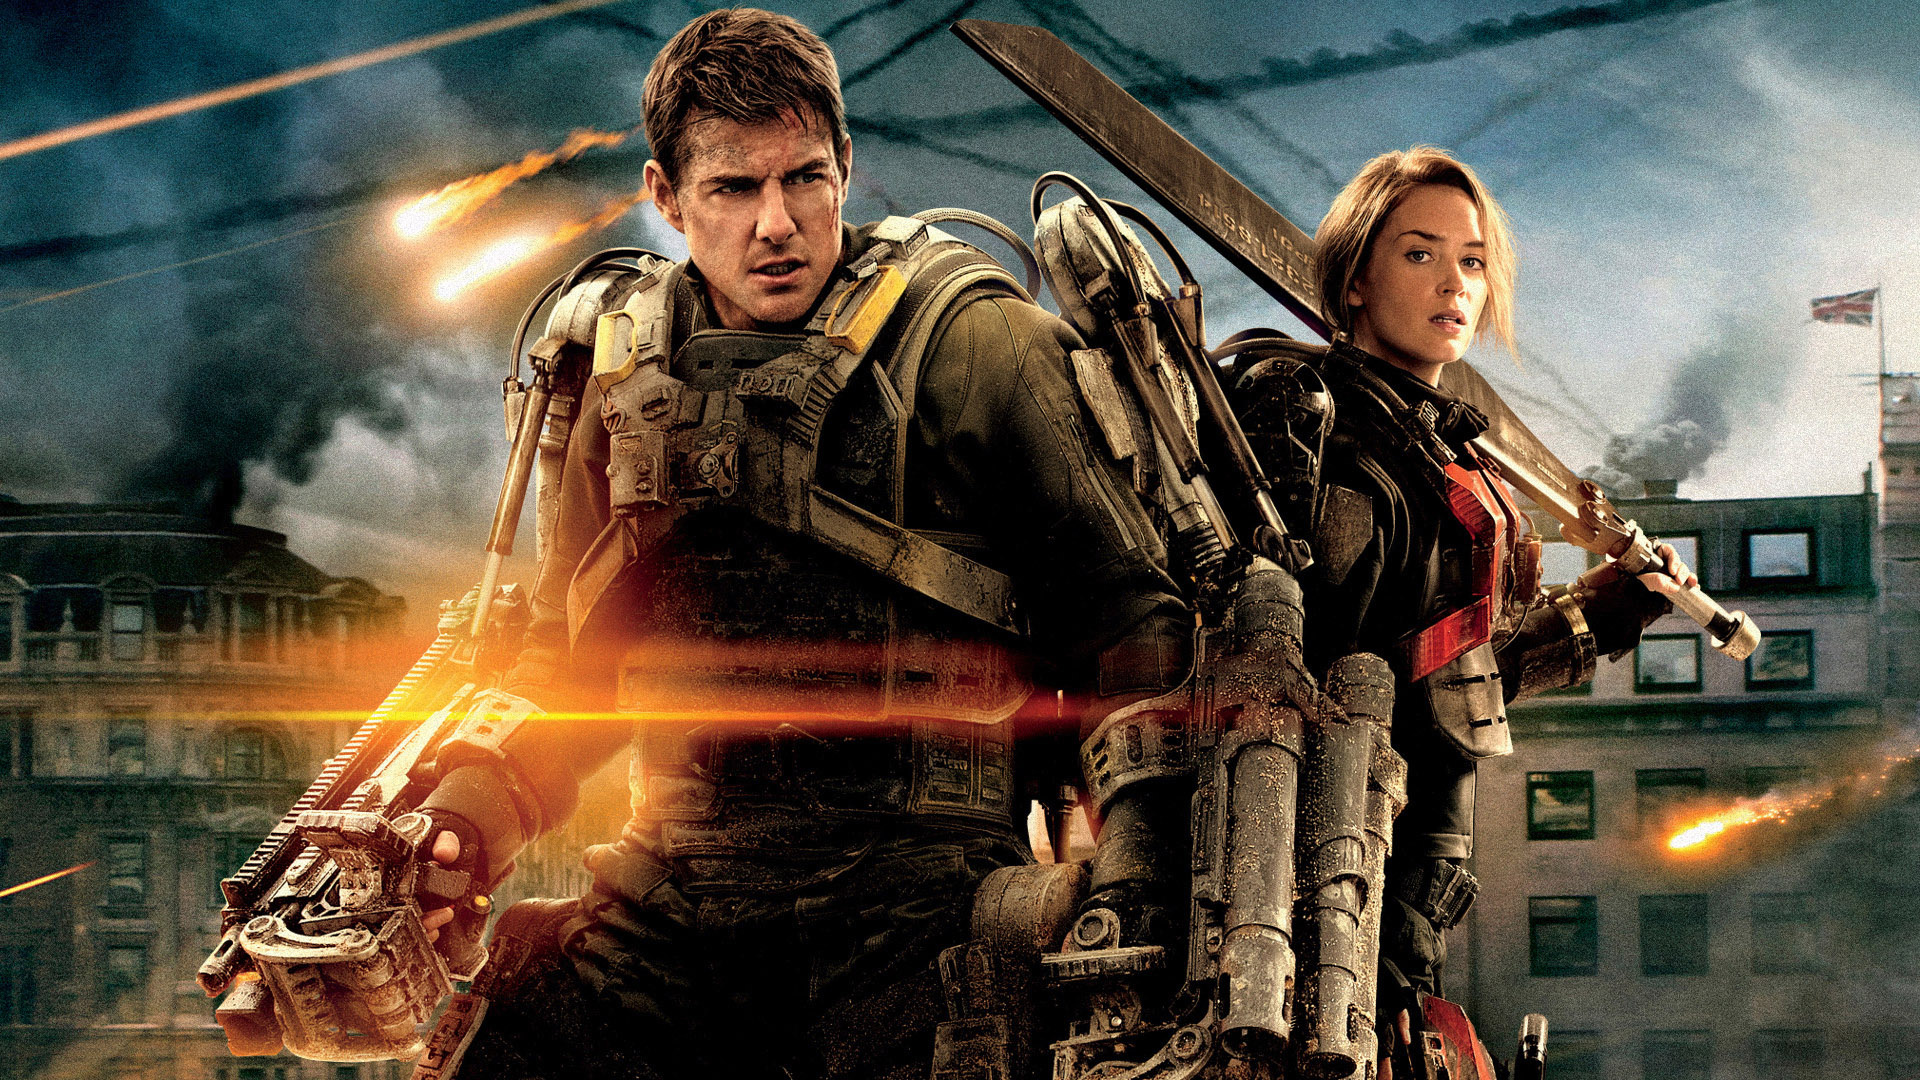 Edge of Tomorrow: Tom Cruise and Emily Blunt, who play the lead roles in the film. 1920x1080 Full HD Wallpaper.